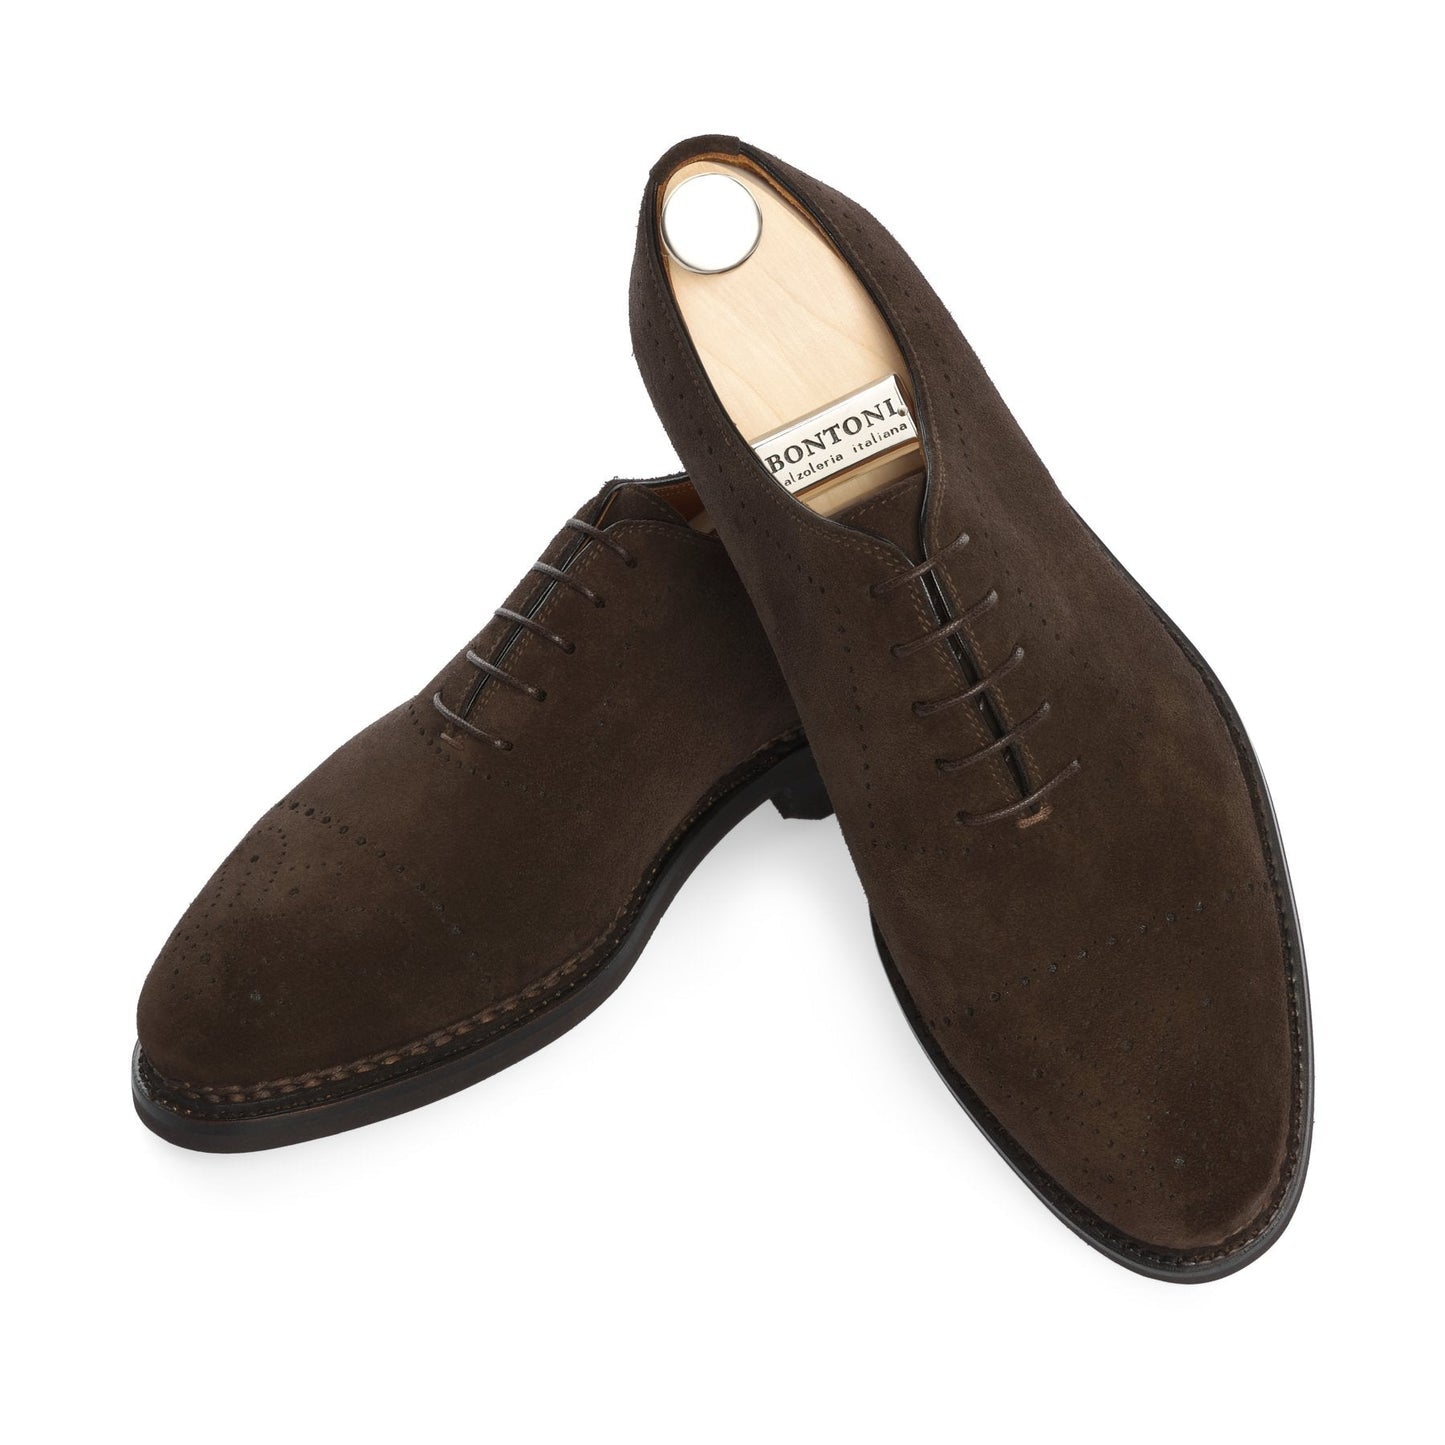 Bontoni «Brera» Five-Eyelet Oxford Suede Shoes with Perforated Details and Medallion in Dark Brown - SARTALE